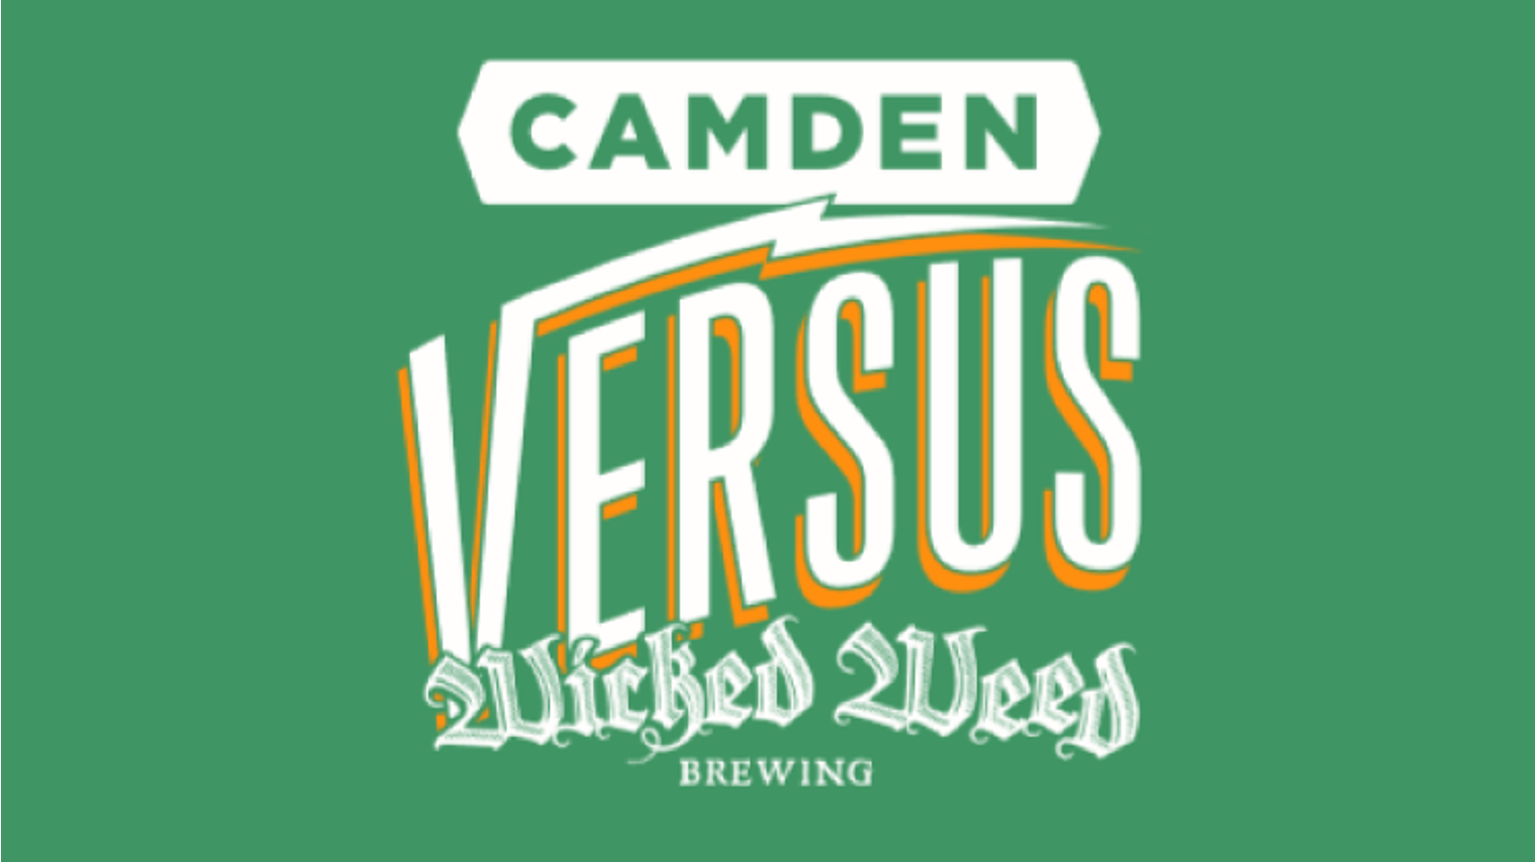 thumbnail for blog article named: Beery Christmas Dag 7: Camden & Wicked Weed Versus IPA